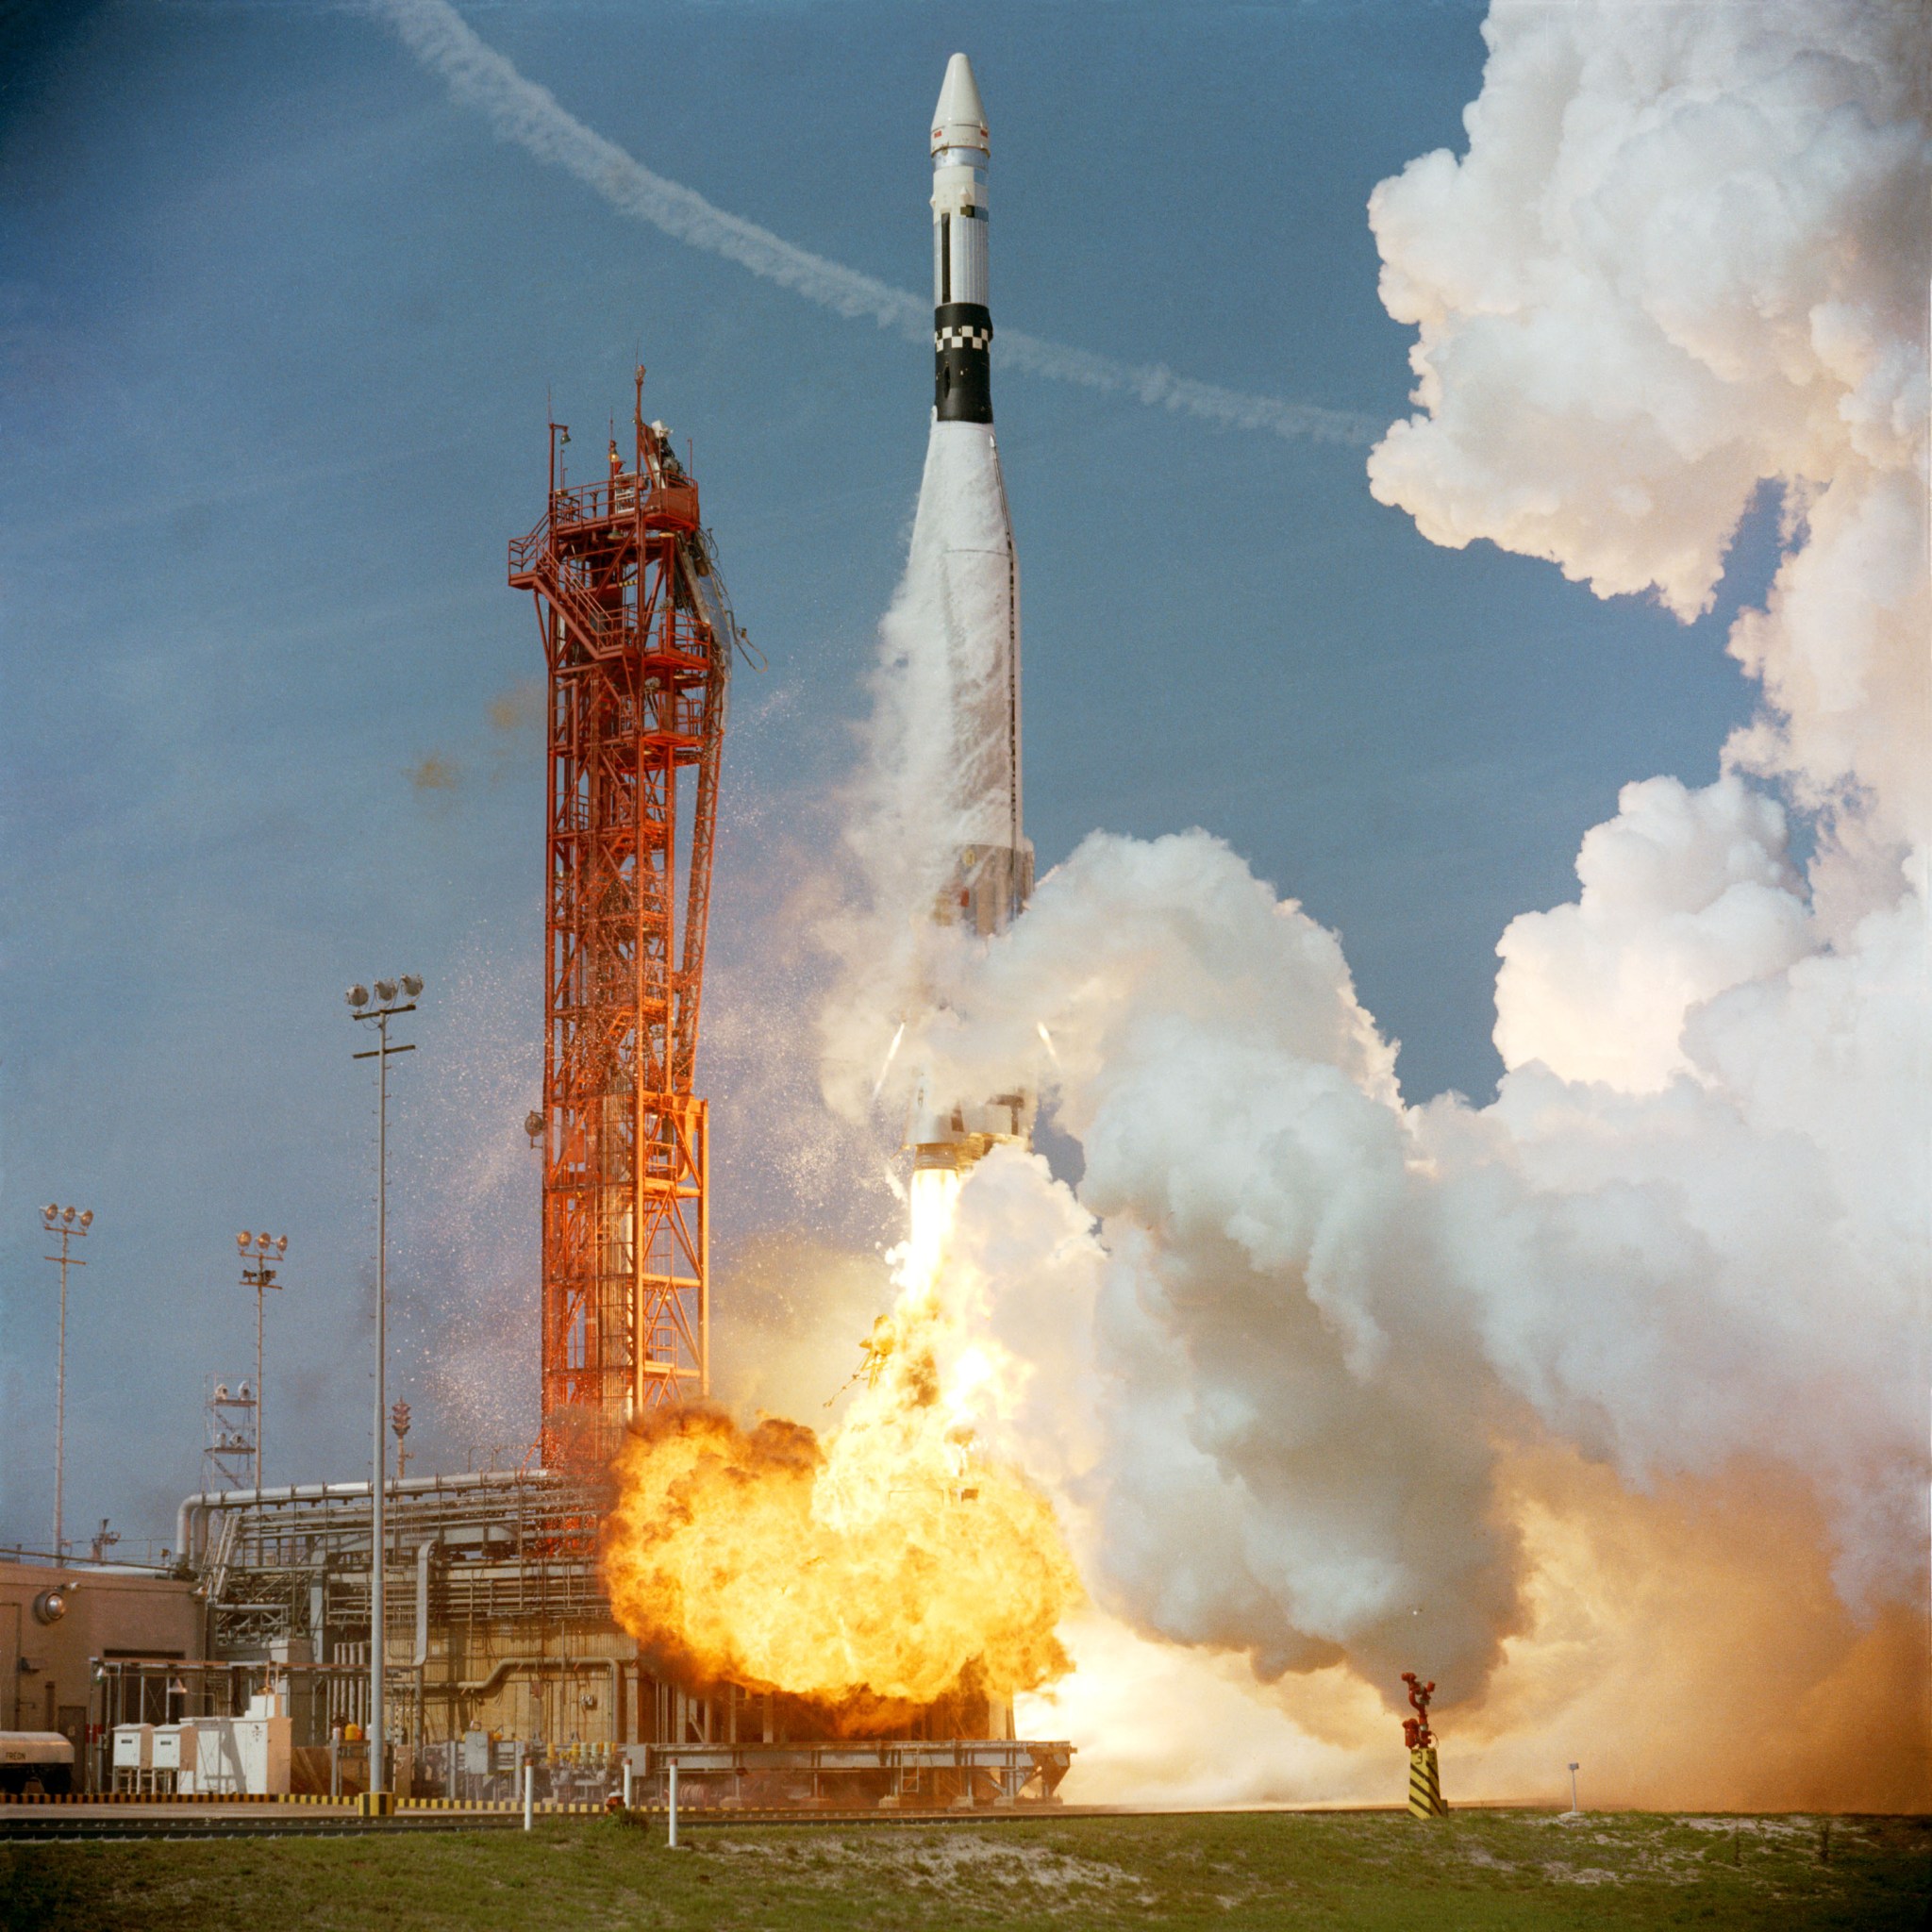 Launch of the Gemini 8 Agena Target Vehicle on March 16, 1966.